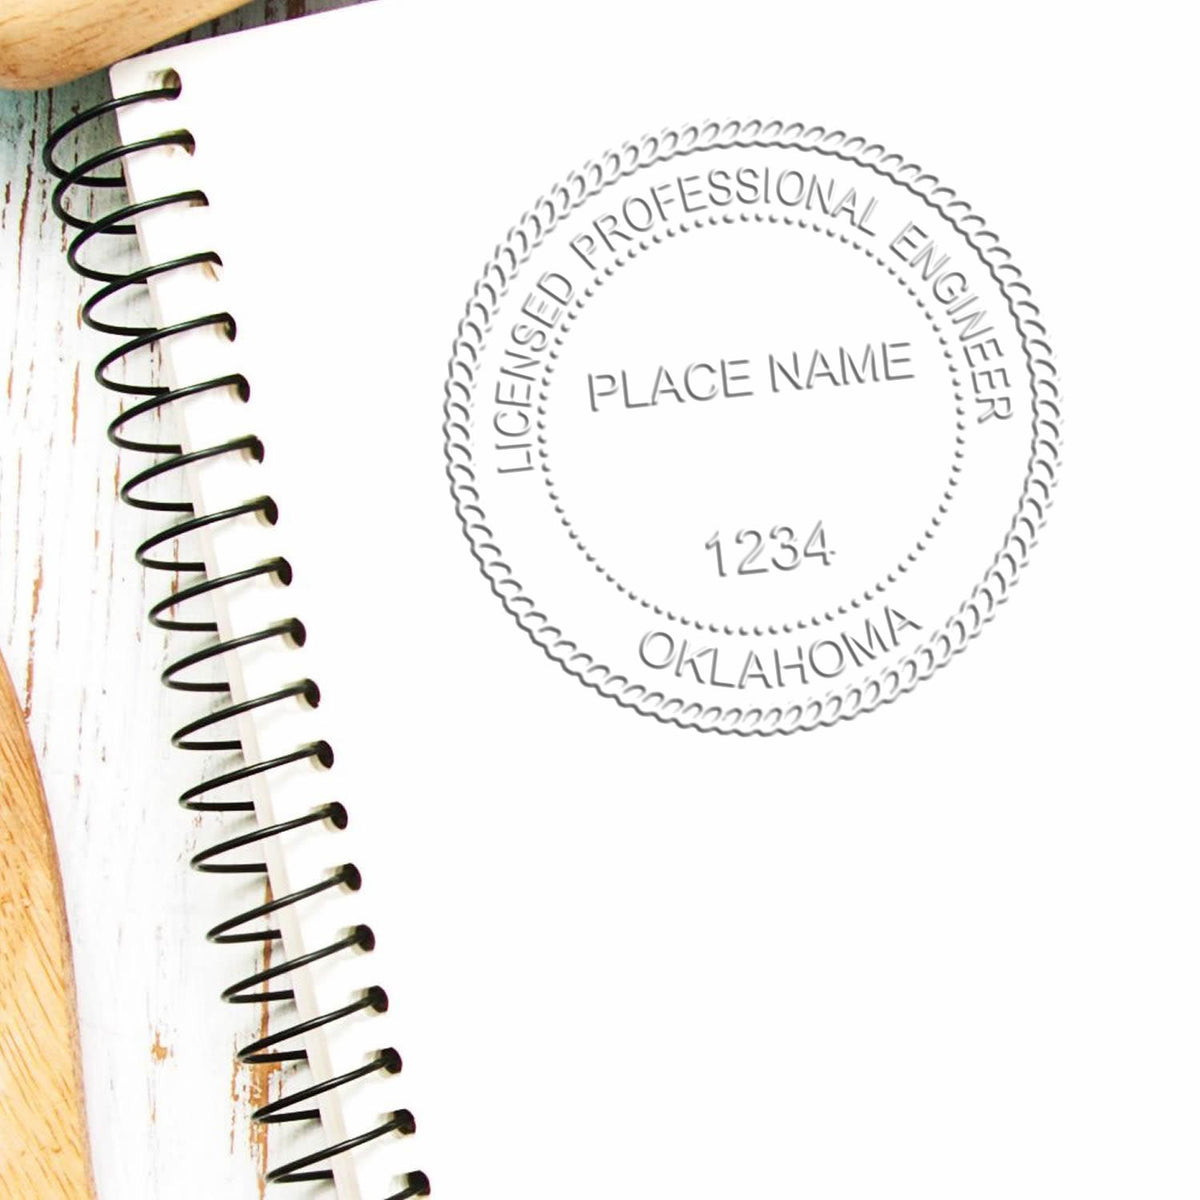 The Gift Oklahoma Engineer Seal stamp impression comes to life with a crisp, detailed image stamped on paper - showcasing true professional quality.